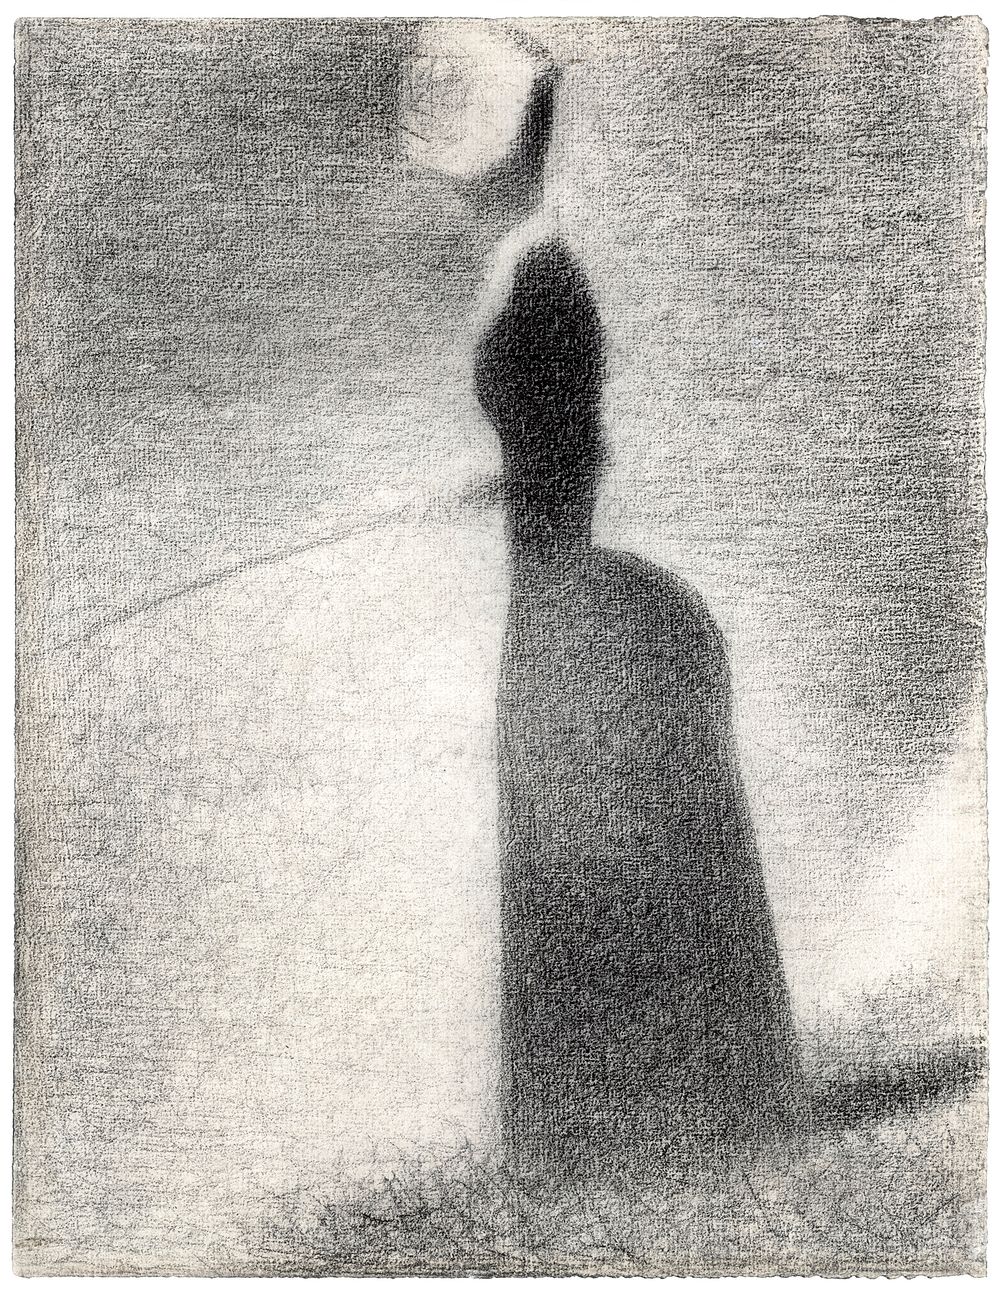 A Woman Fishing (1884) by Georges Seurat. Original from The MET Museum. Digitally enhanced by rawpixel.